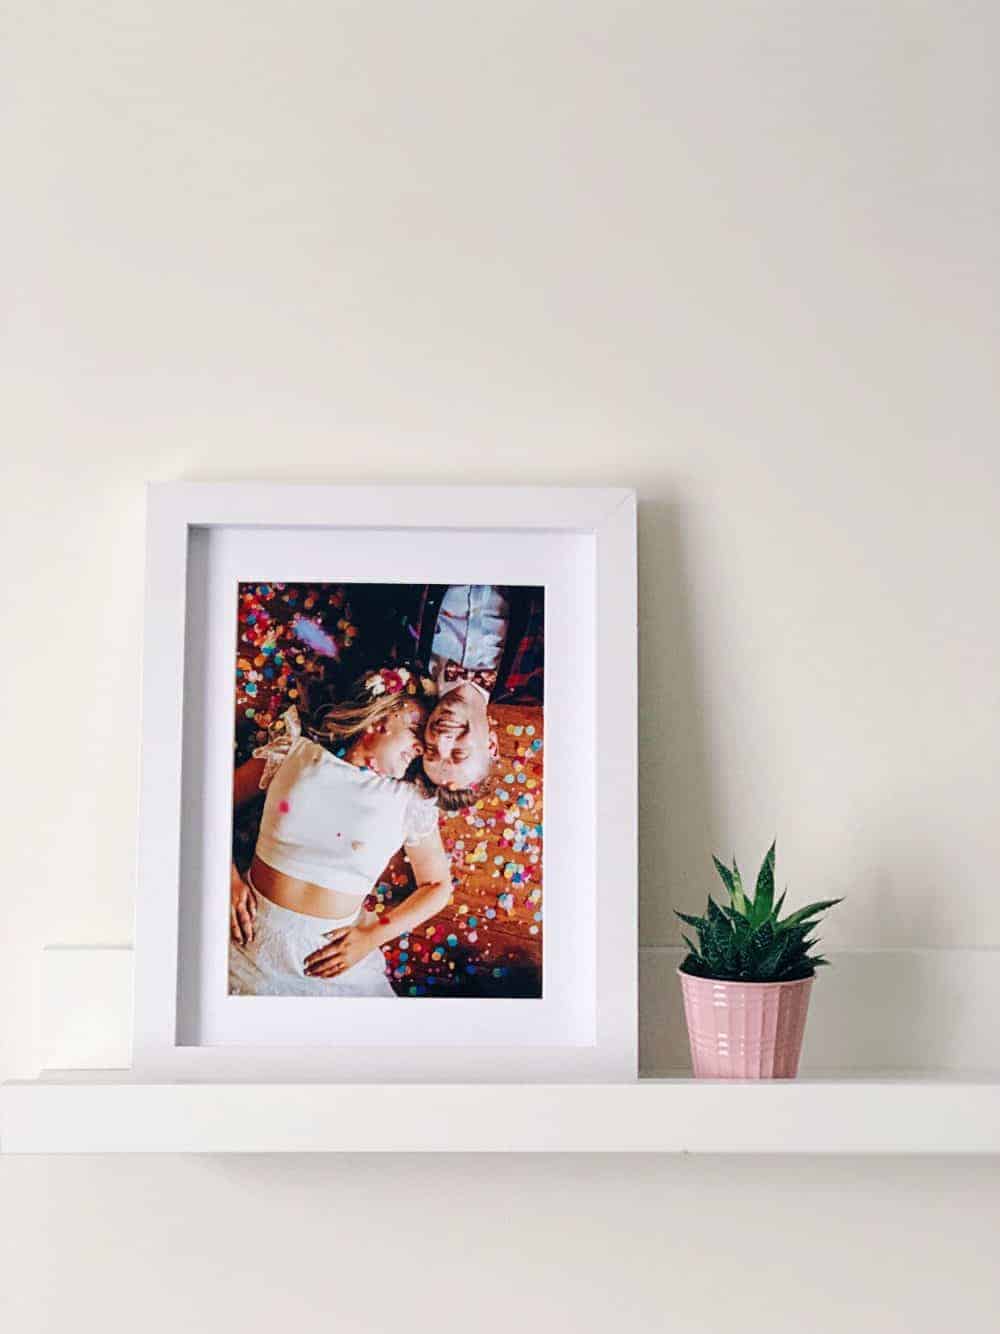 3 SIMPLE YET STYLISH WAYS TO DISPLAY YOUR WEDDING PHOTOS AT HOME WITH SNAPBOOK